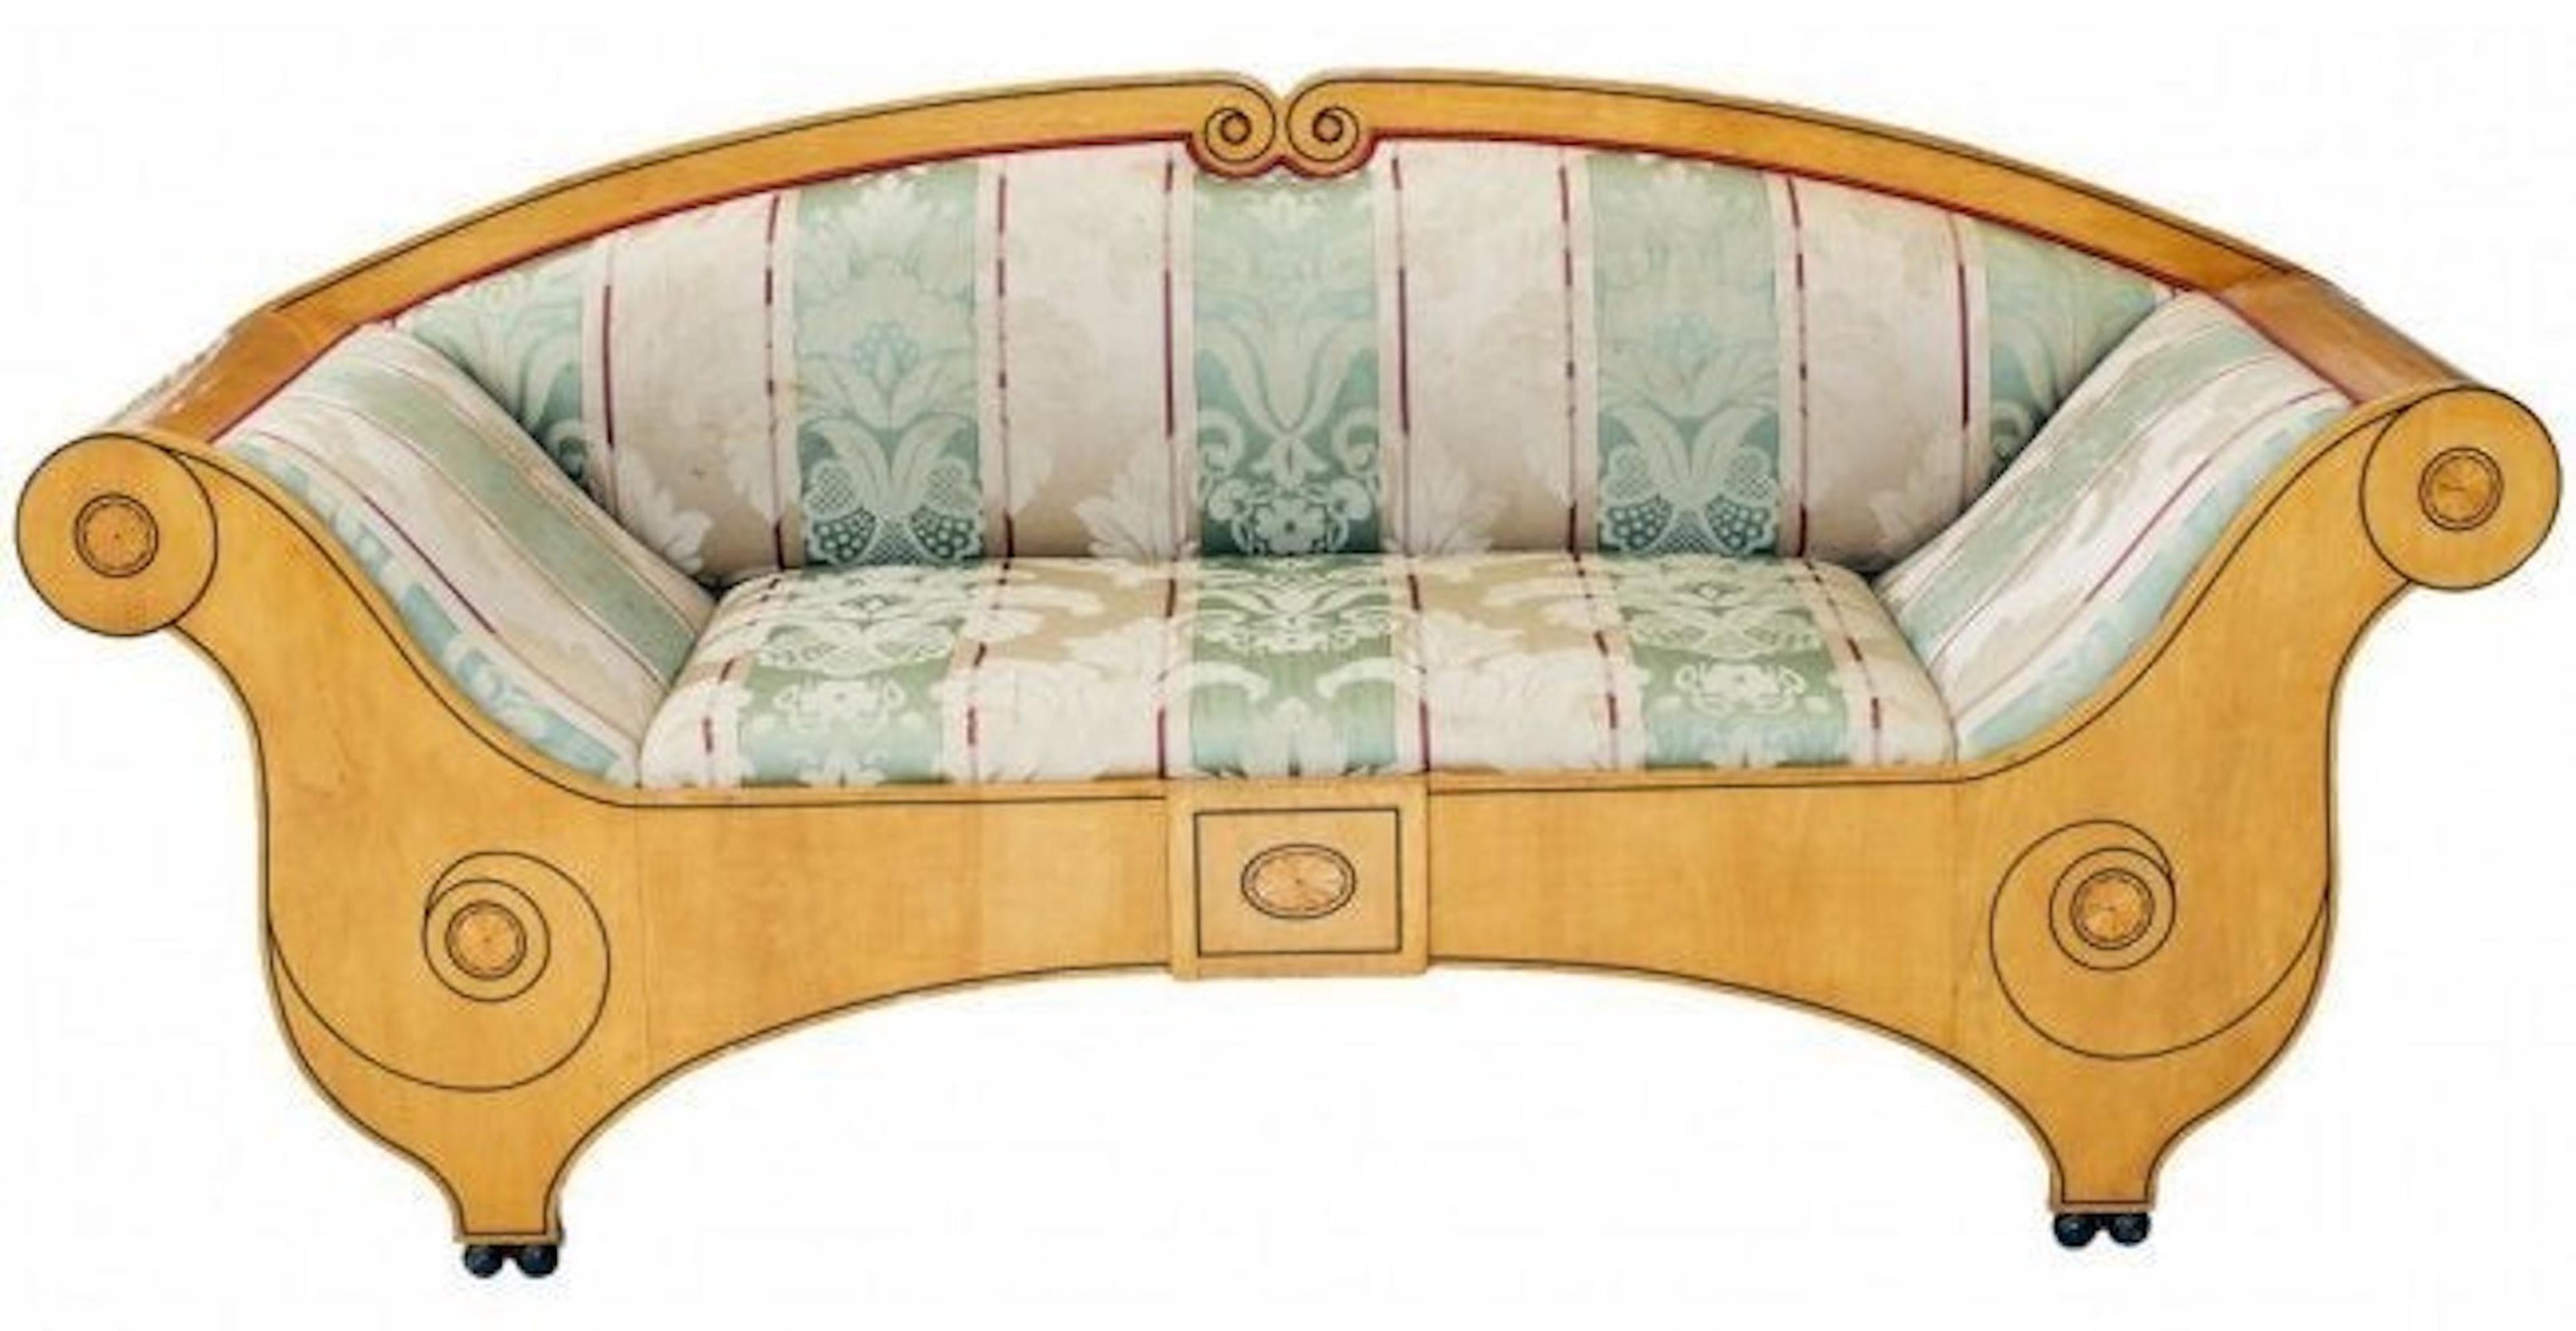 Biedermeier style Swedish neoclassical style aofa
The arched crest flanked by exaggerated out-scrolled ends, decorated with black-painted scrollwork with inlaid flower head terminals; upholstered in floral-patterned green damask.
Measures: Height